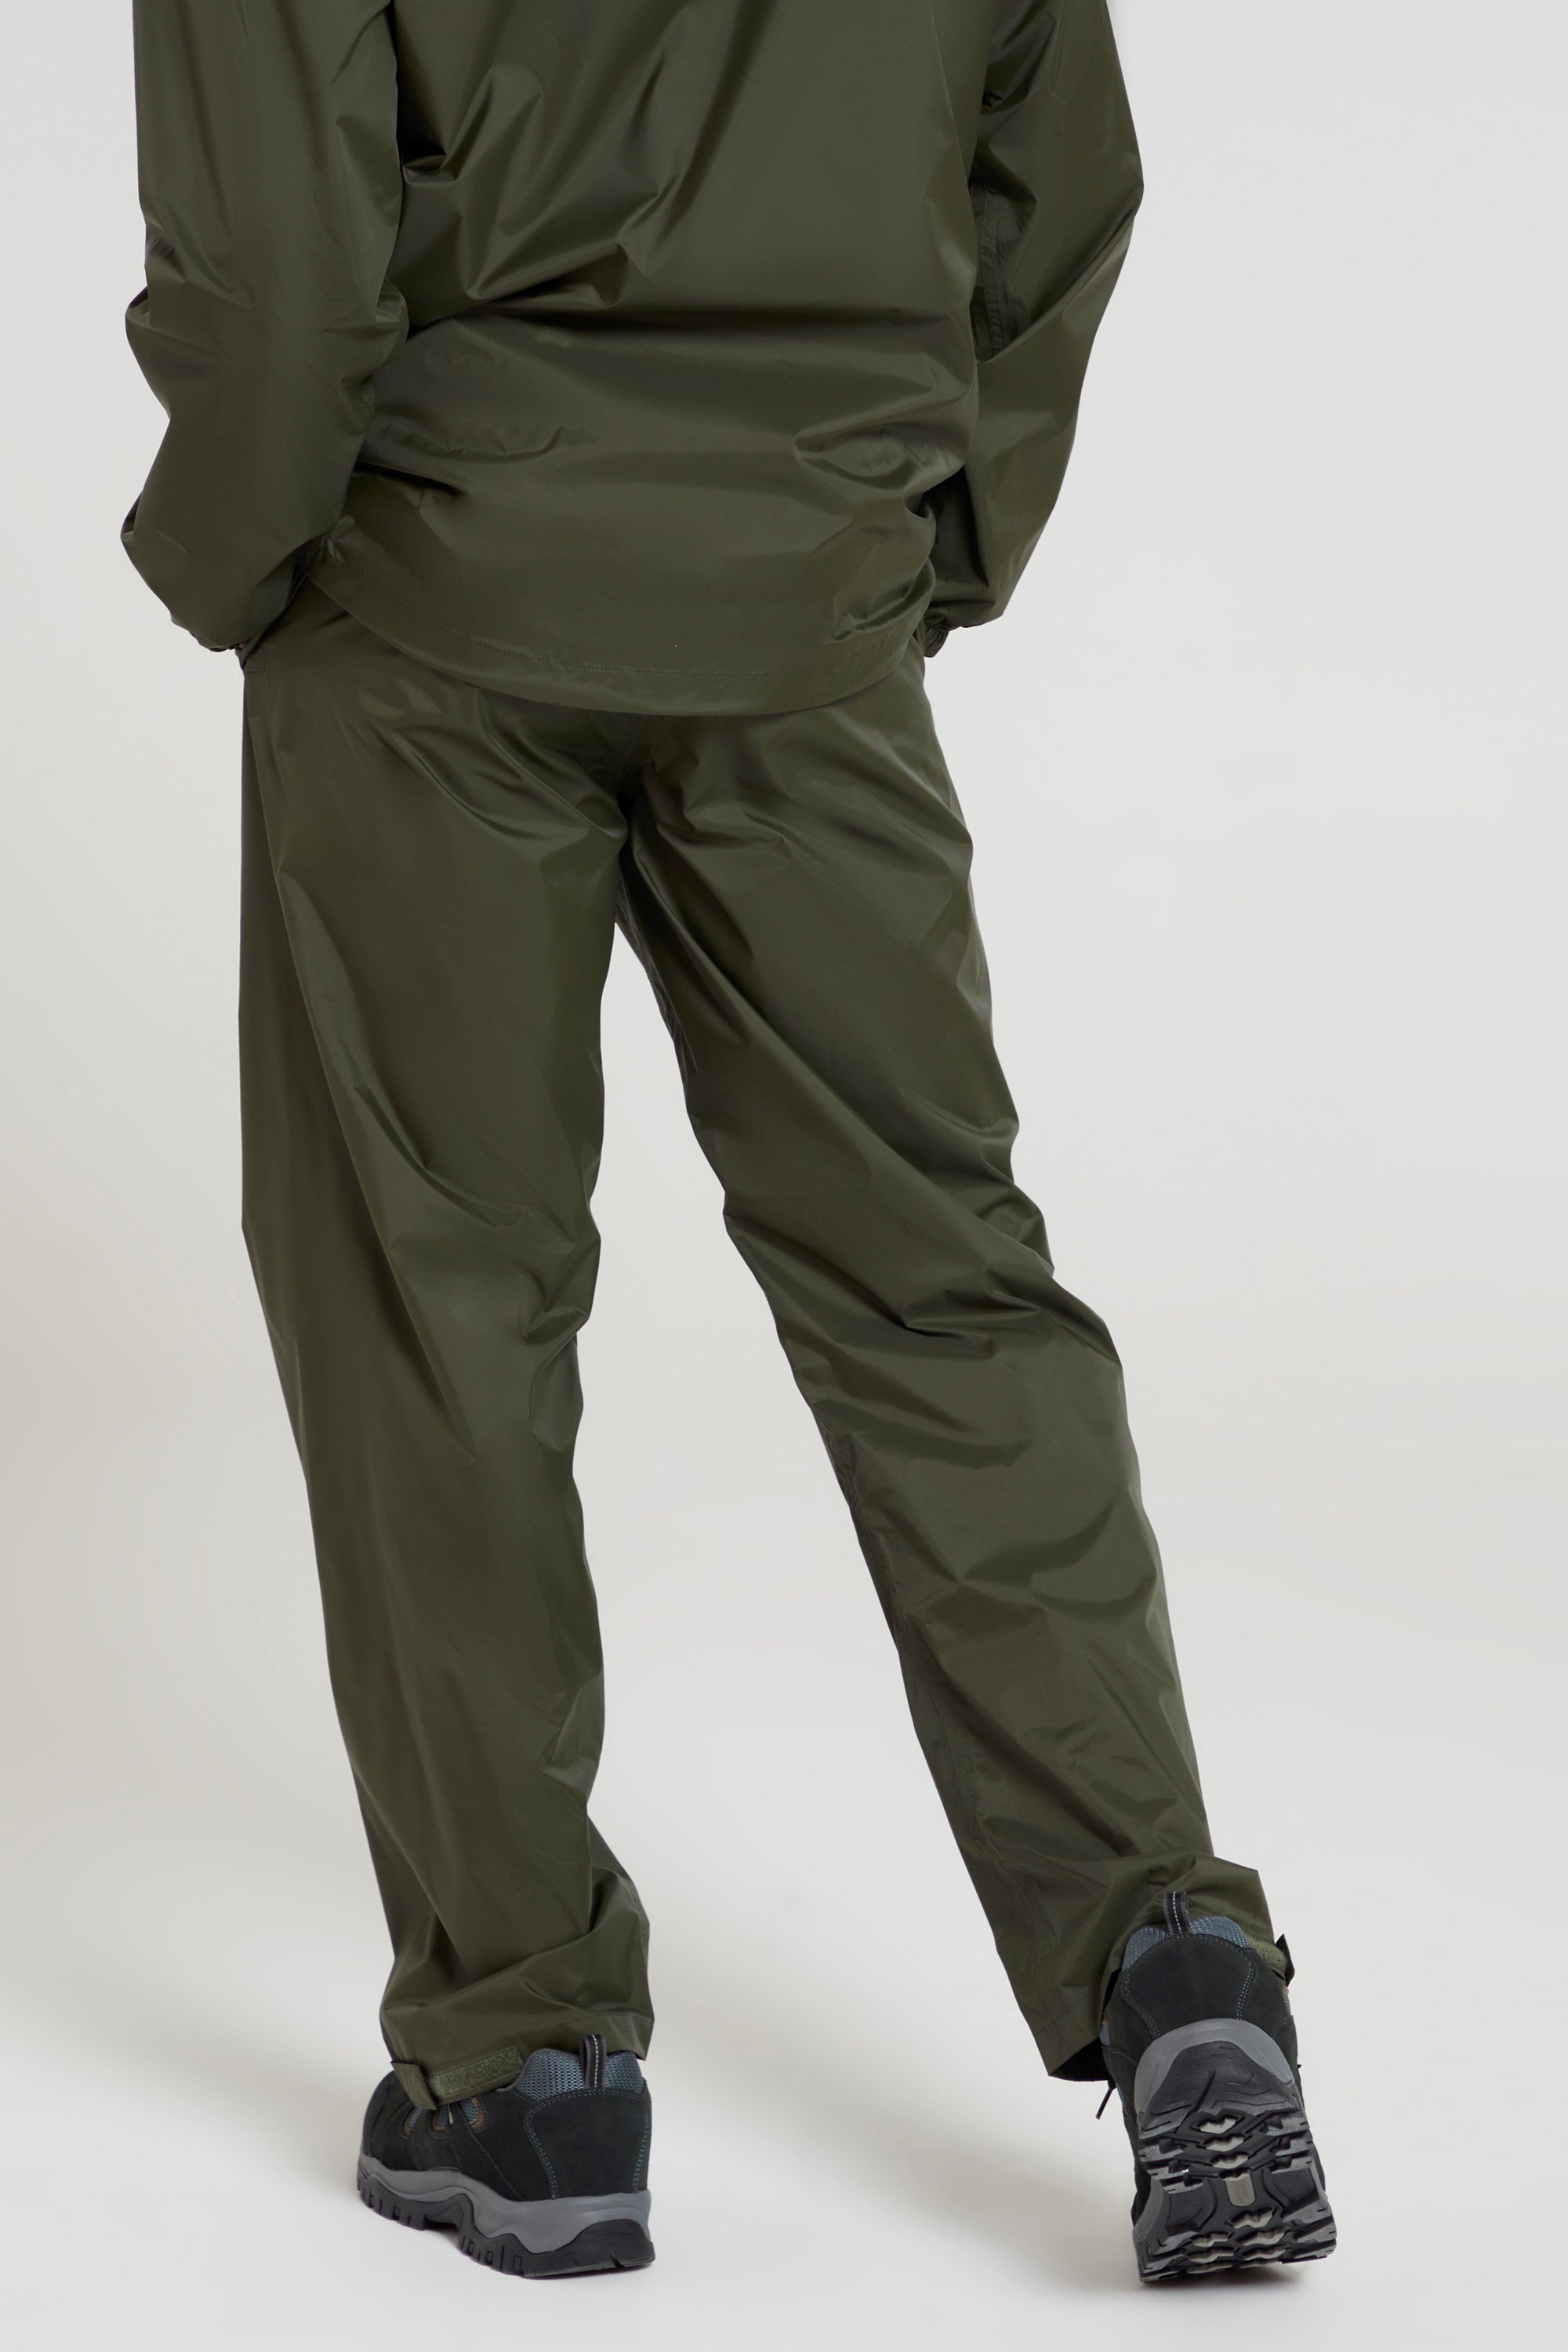 892B - Baleno Holmes Men's Waterproof Trousers - TO CLEAR from £101.24